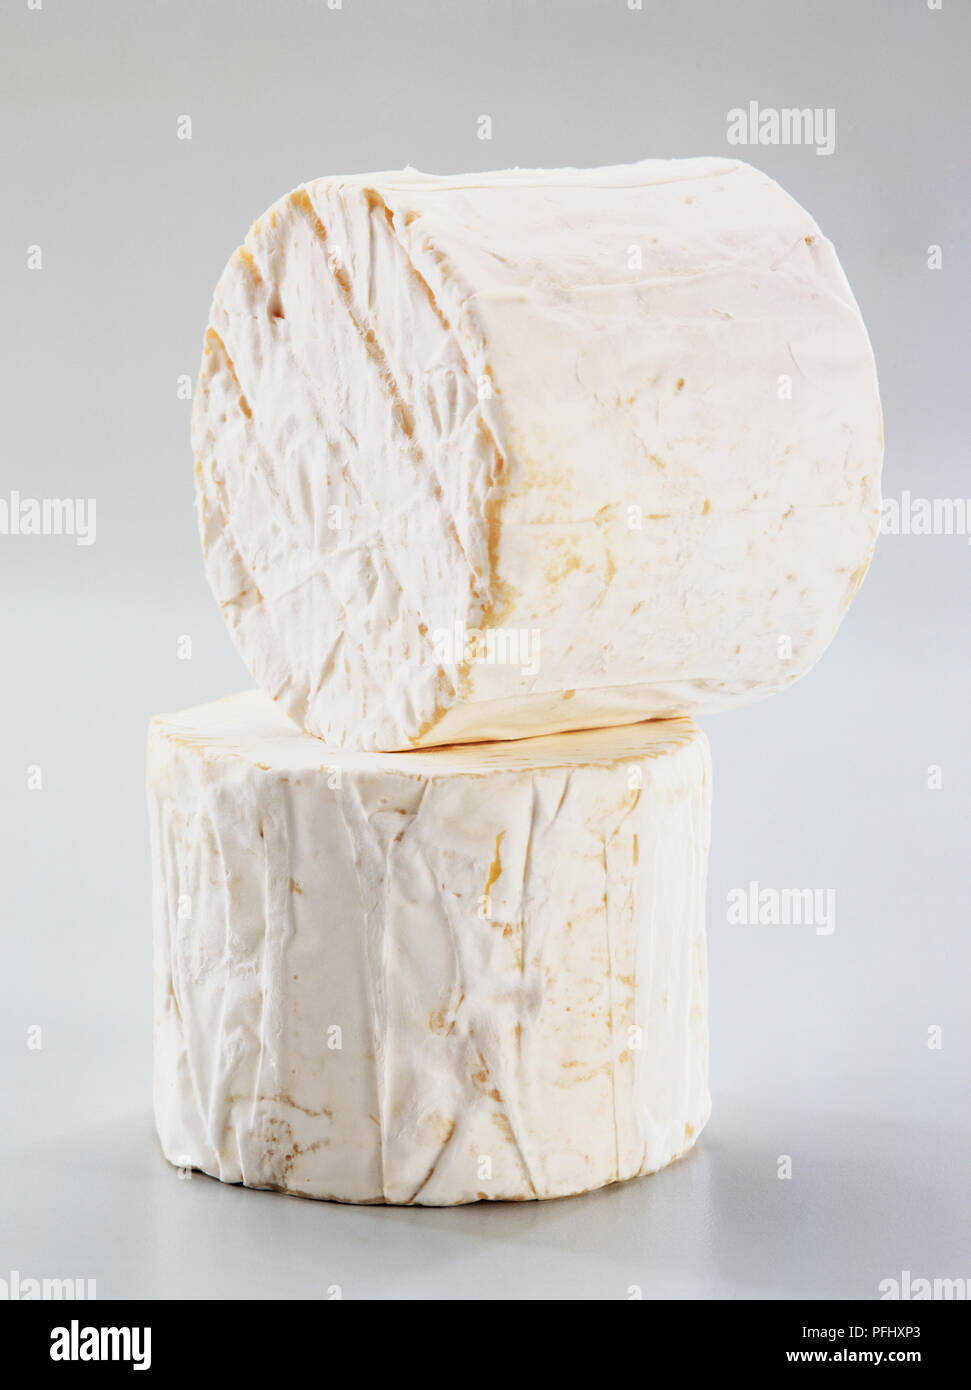 Two cylindrical blocks of camembert cheese, close up. Stock Photo